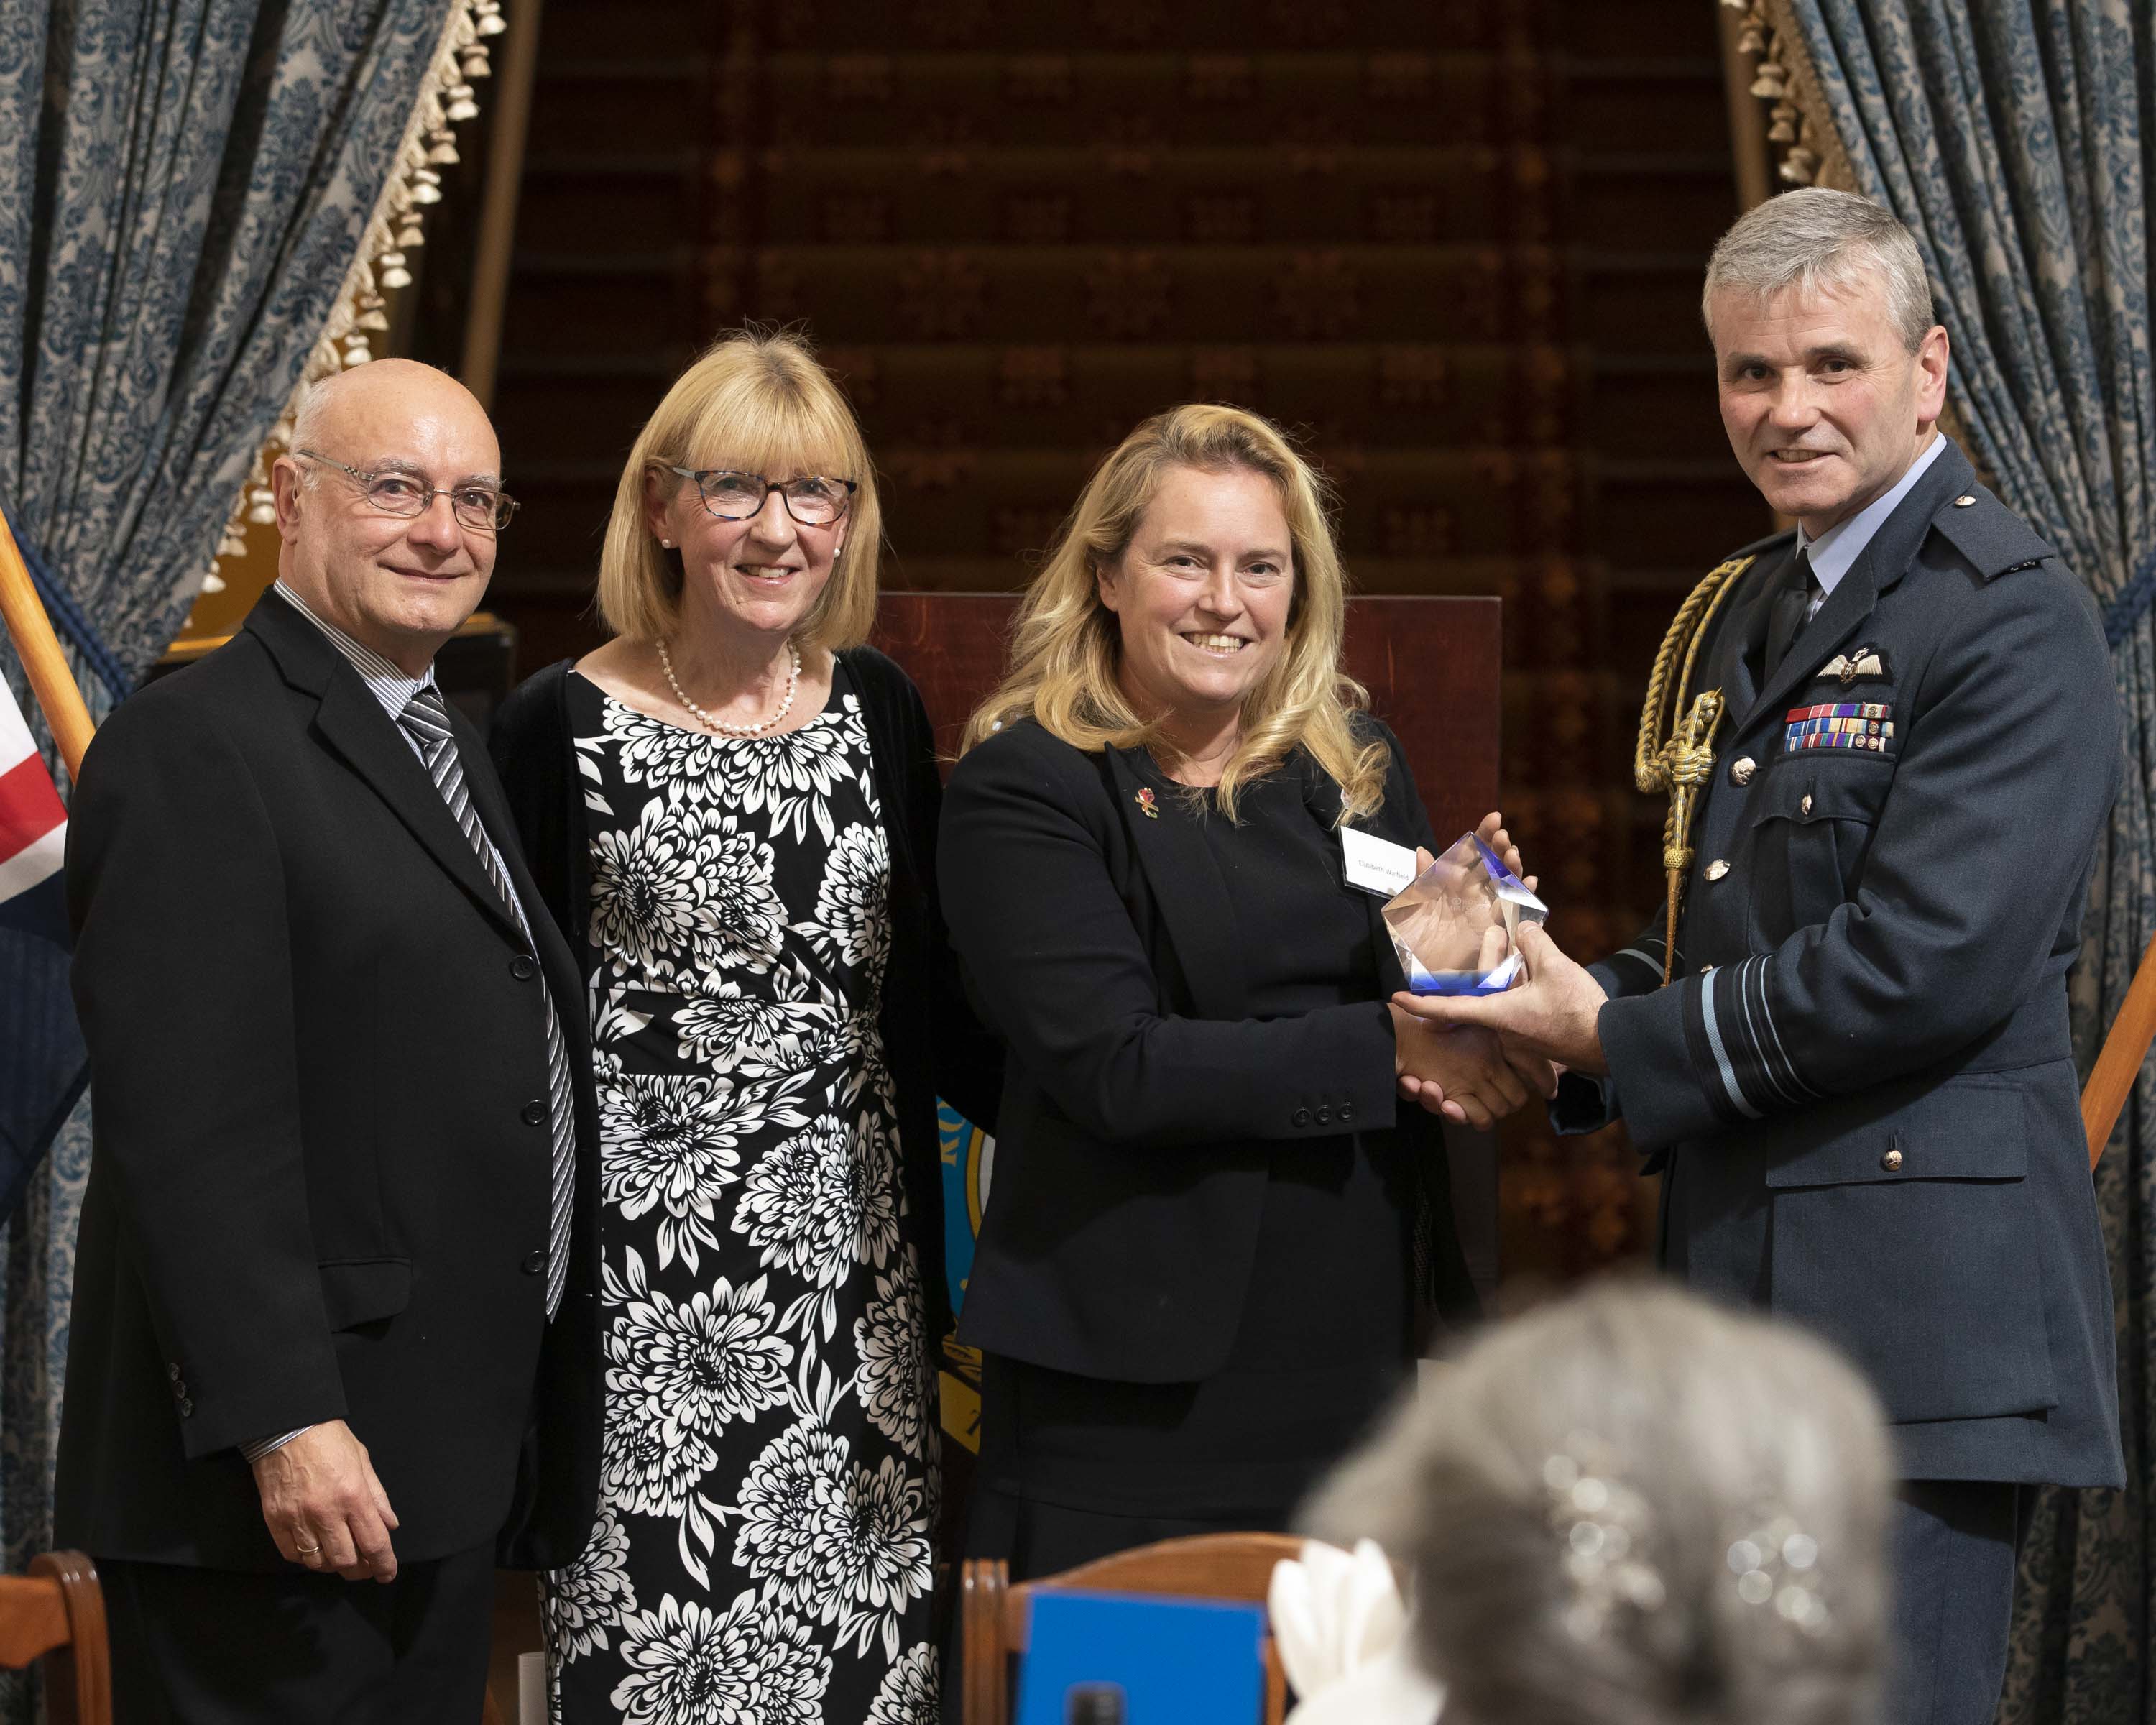 Senior Aircraftwoman Shona Brownlee shakes hands with Air Marshall Andrew Turner while accepting her award, with two others.